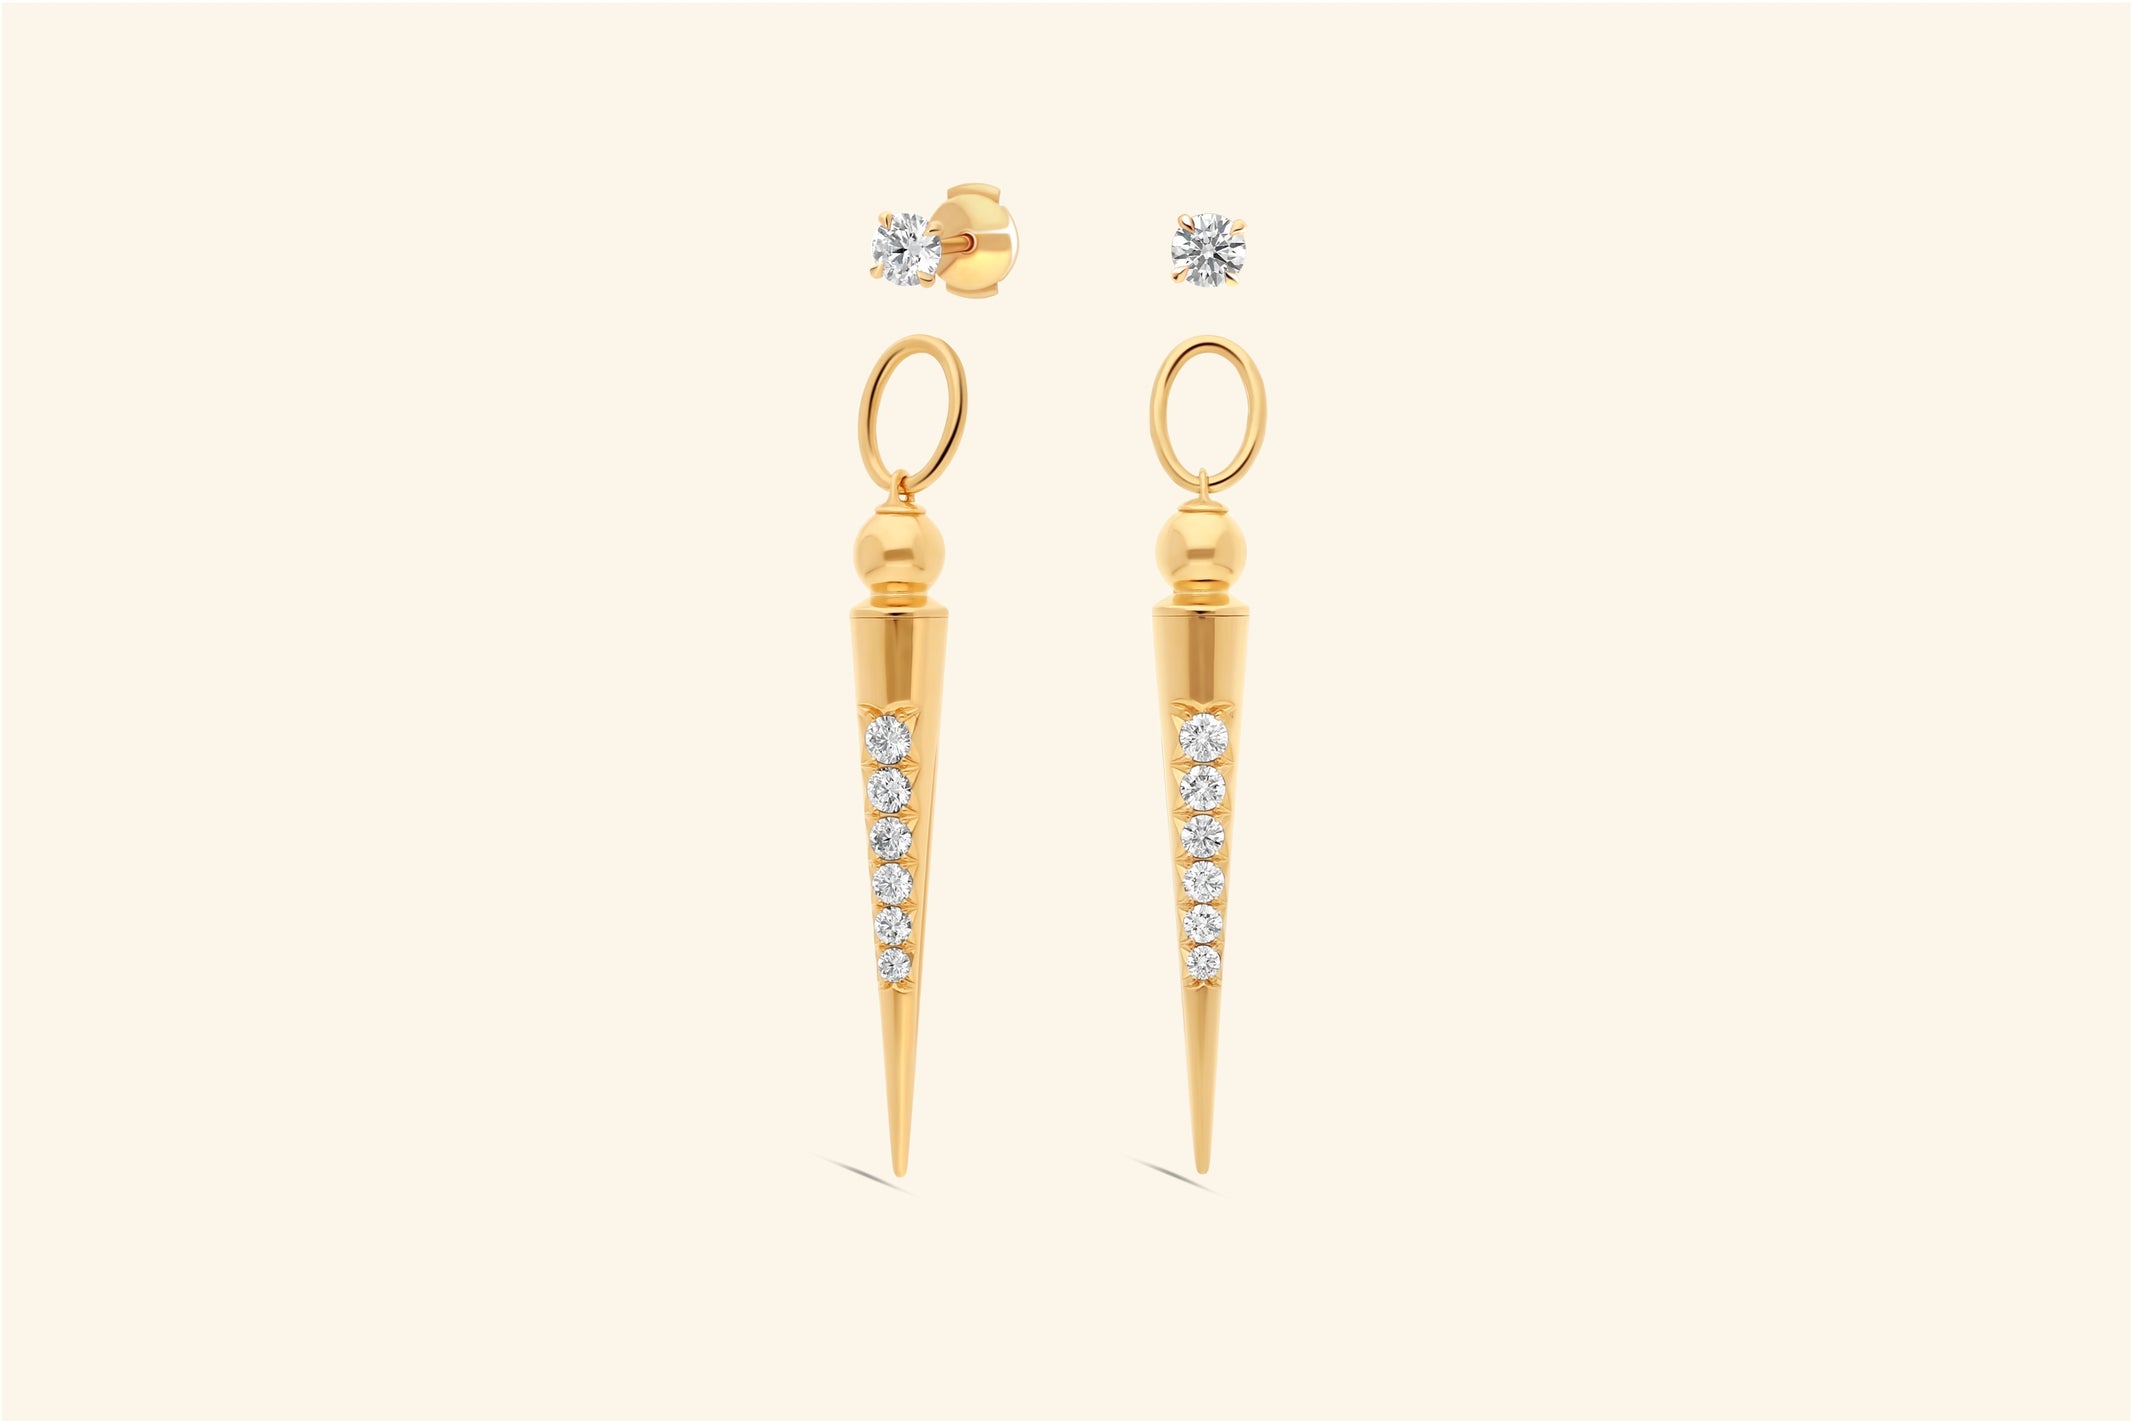 Pampille earrings, yellow gold, diamonds